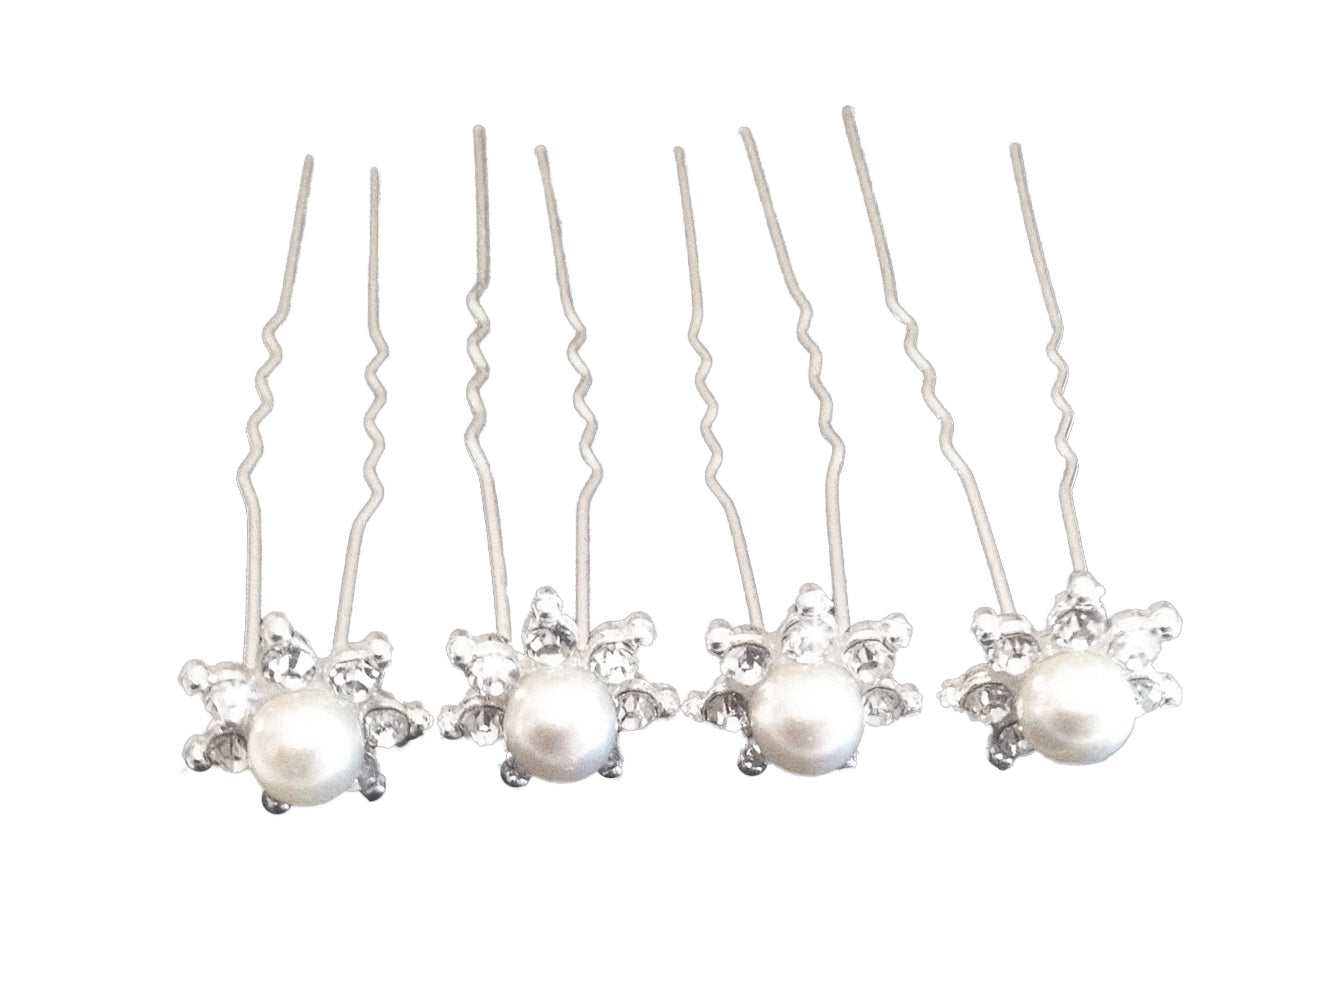 Crystal and Pearl Flower Hair Pin, An exquisite faux pearl hair on seven clear crystal petals encapsulated on a silver coloured hair prong pin clip, perfect for a prom, communion, wedding or special occasion